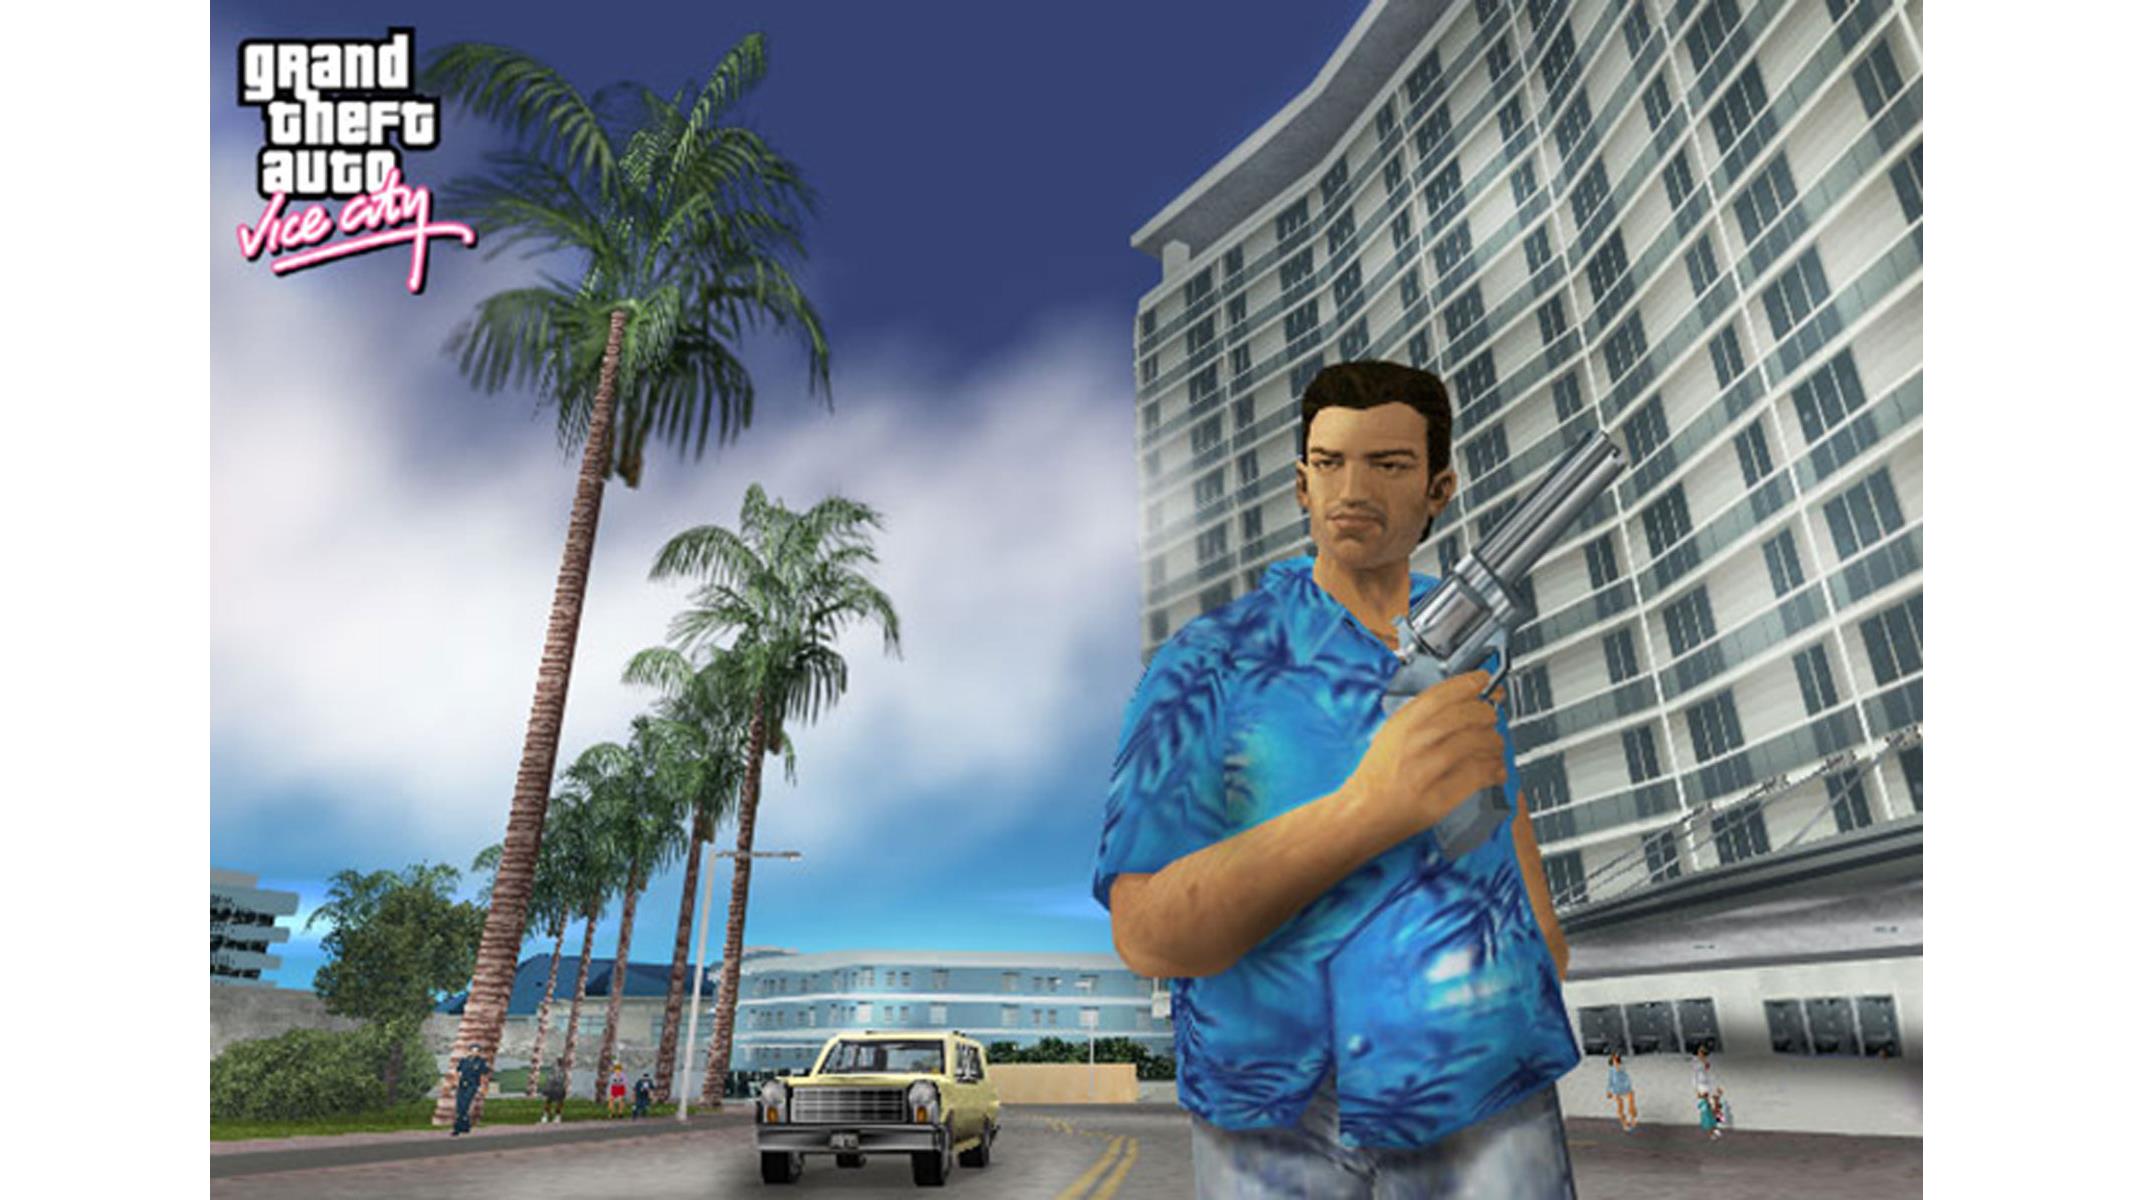 GTA Vice City Stories' surfaces online ahead of anticipated GTA 6